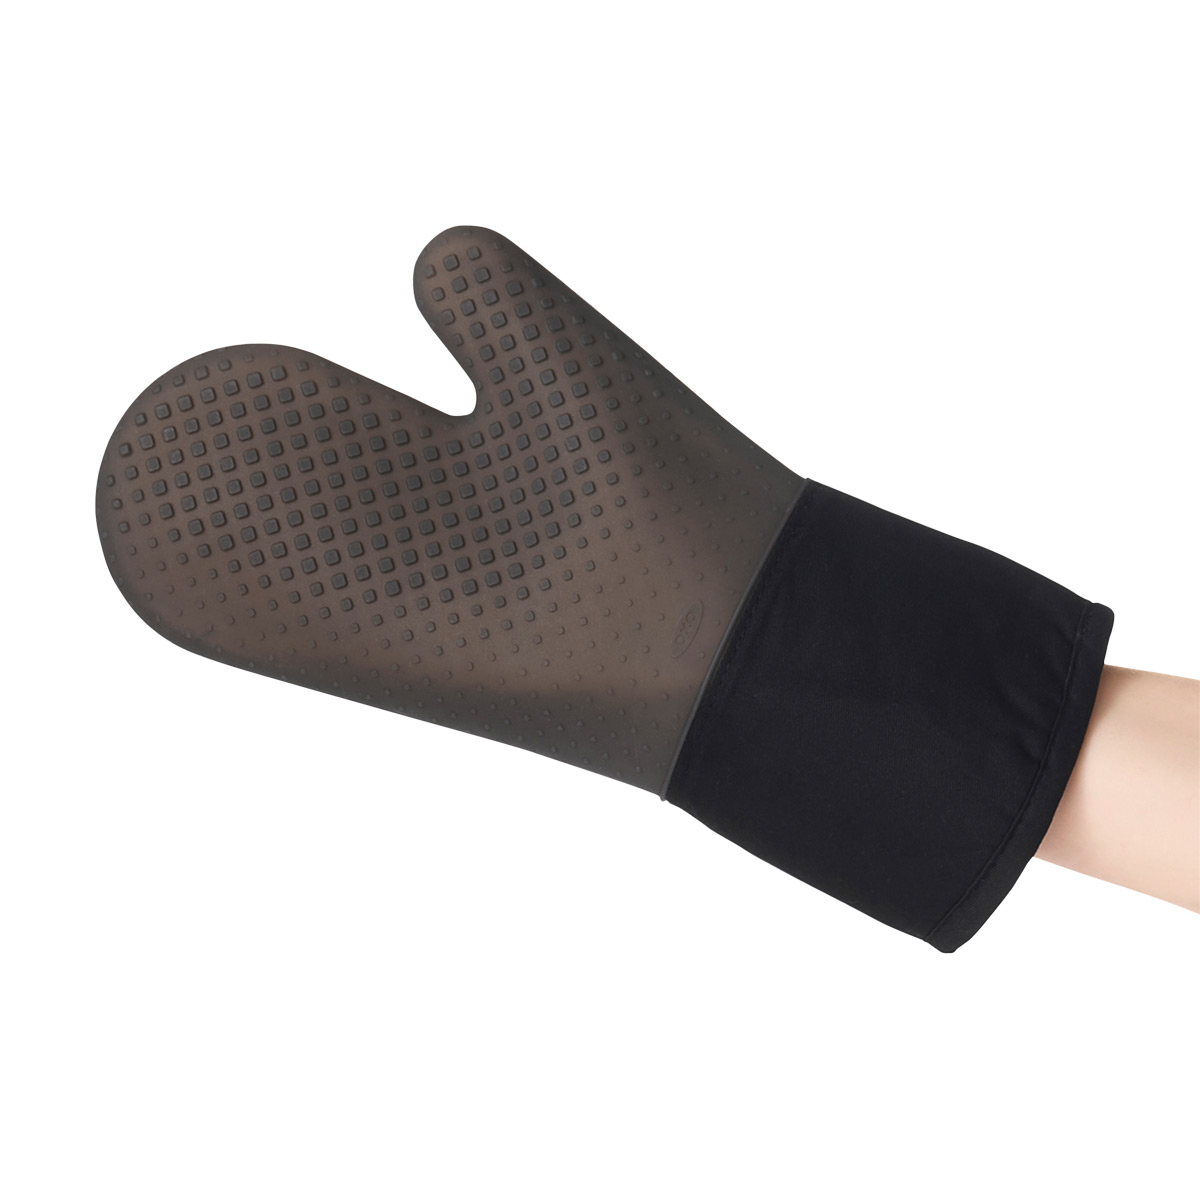 https://www.containerstore.com/catalogimages/347569/10076038-OXO-Silicone-Oven-Mitt-VEN2.jpg